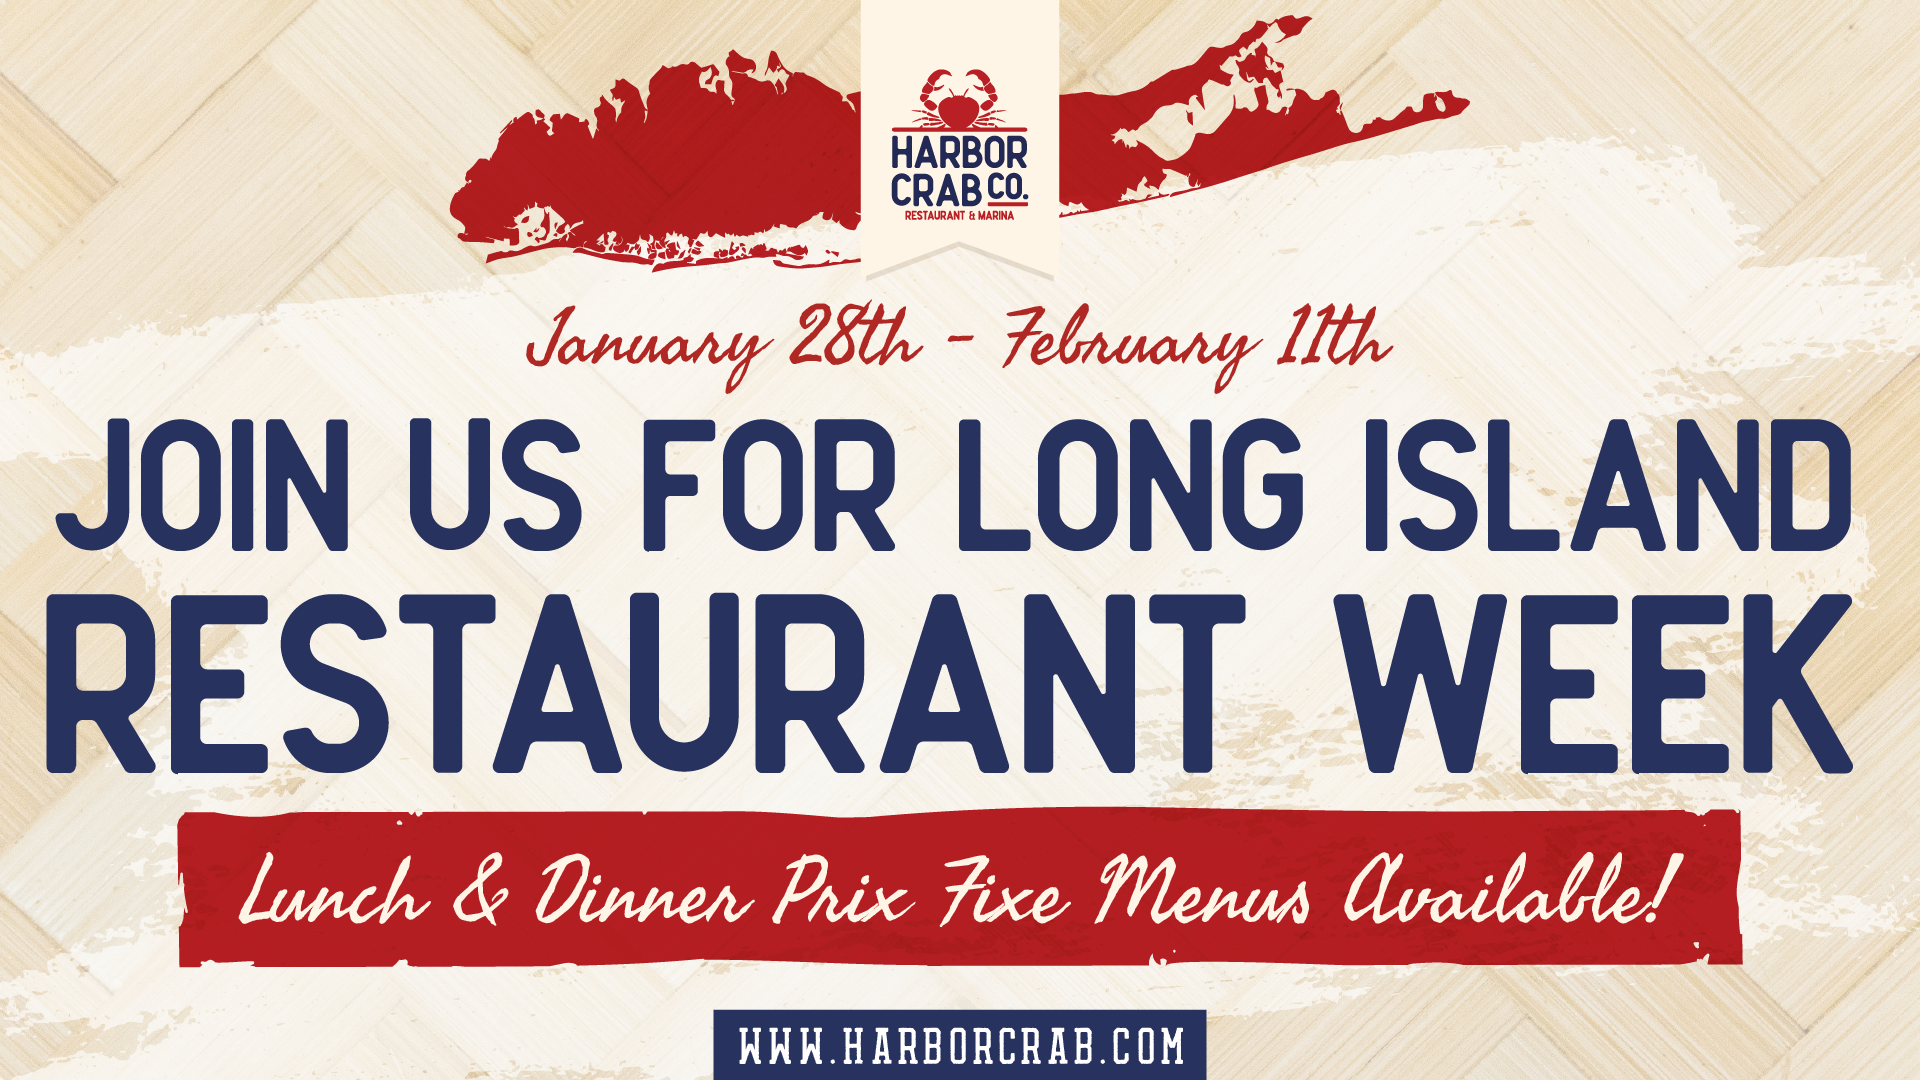 Join Us at Harbor Crab for Long Island Restaurant Week from Jan. 28th to Feb. 11th!